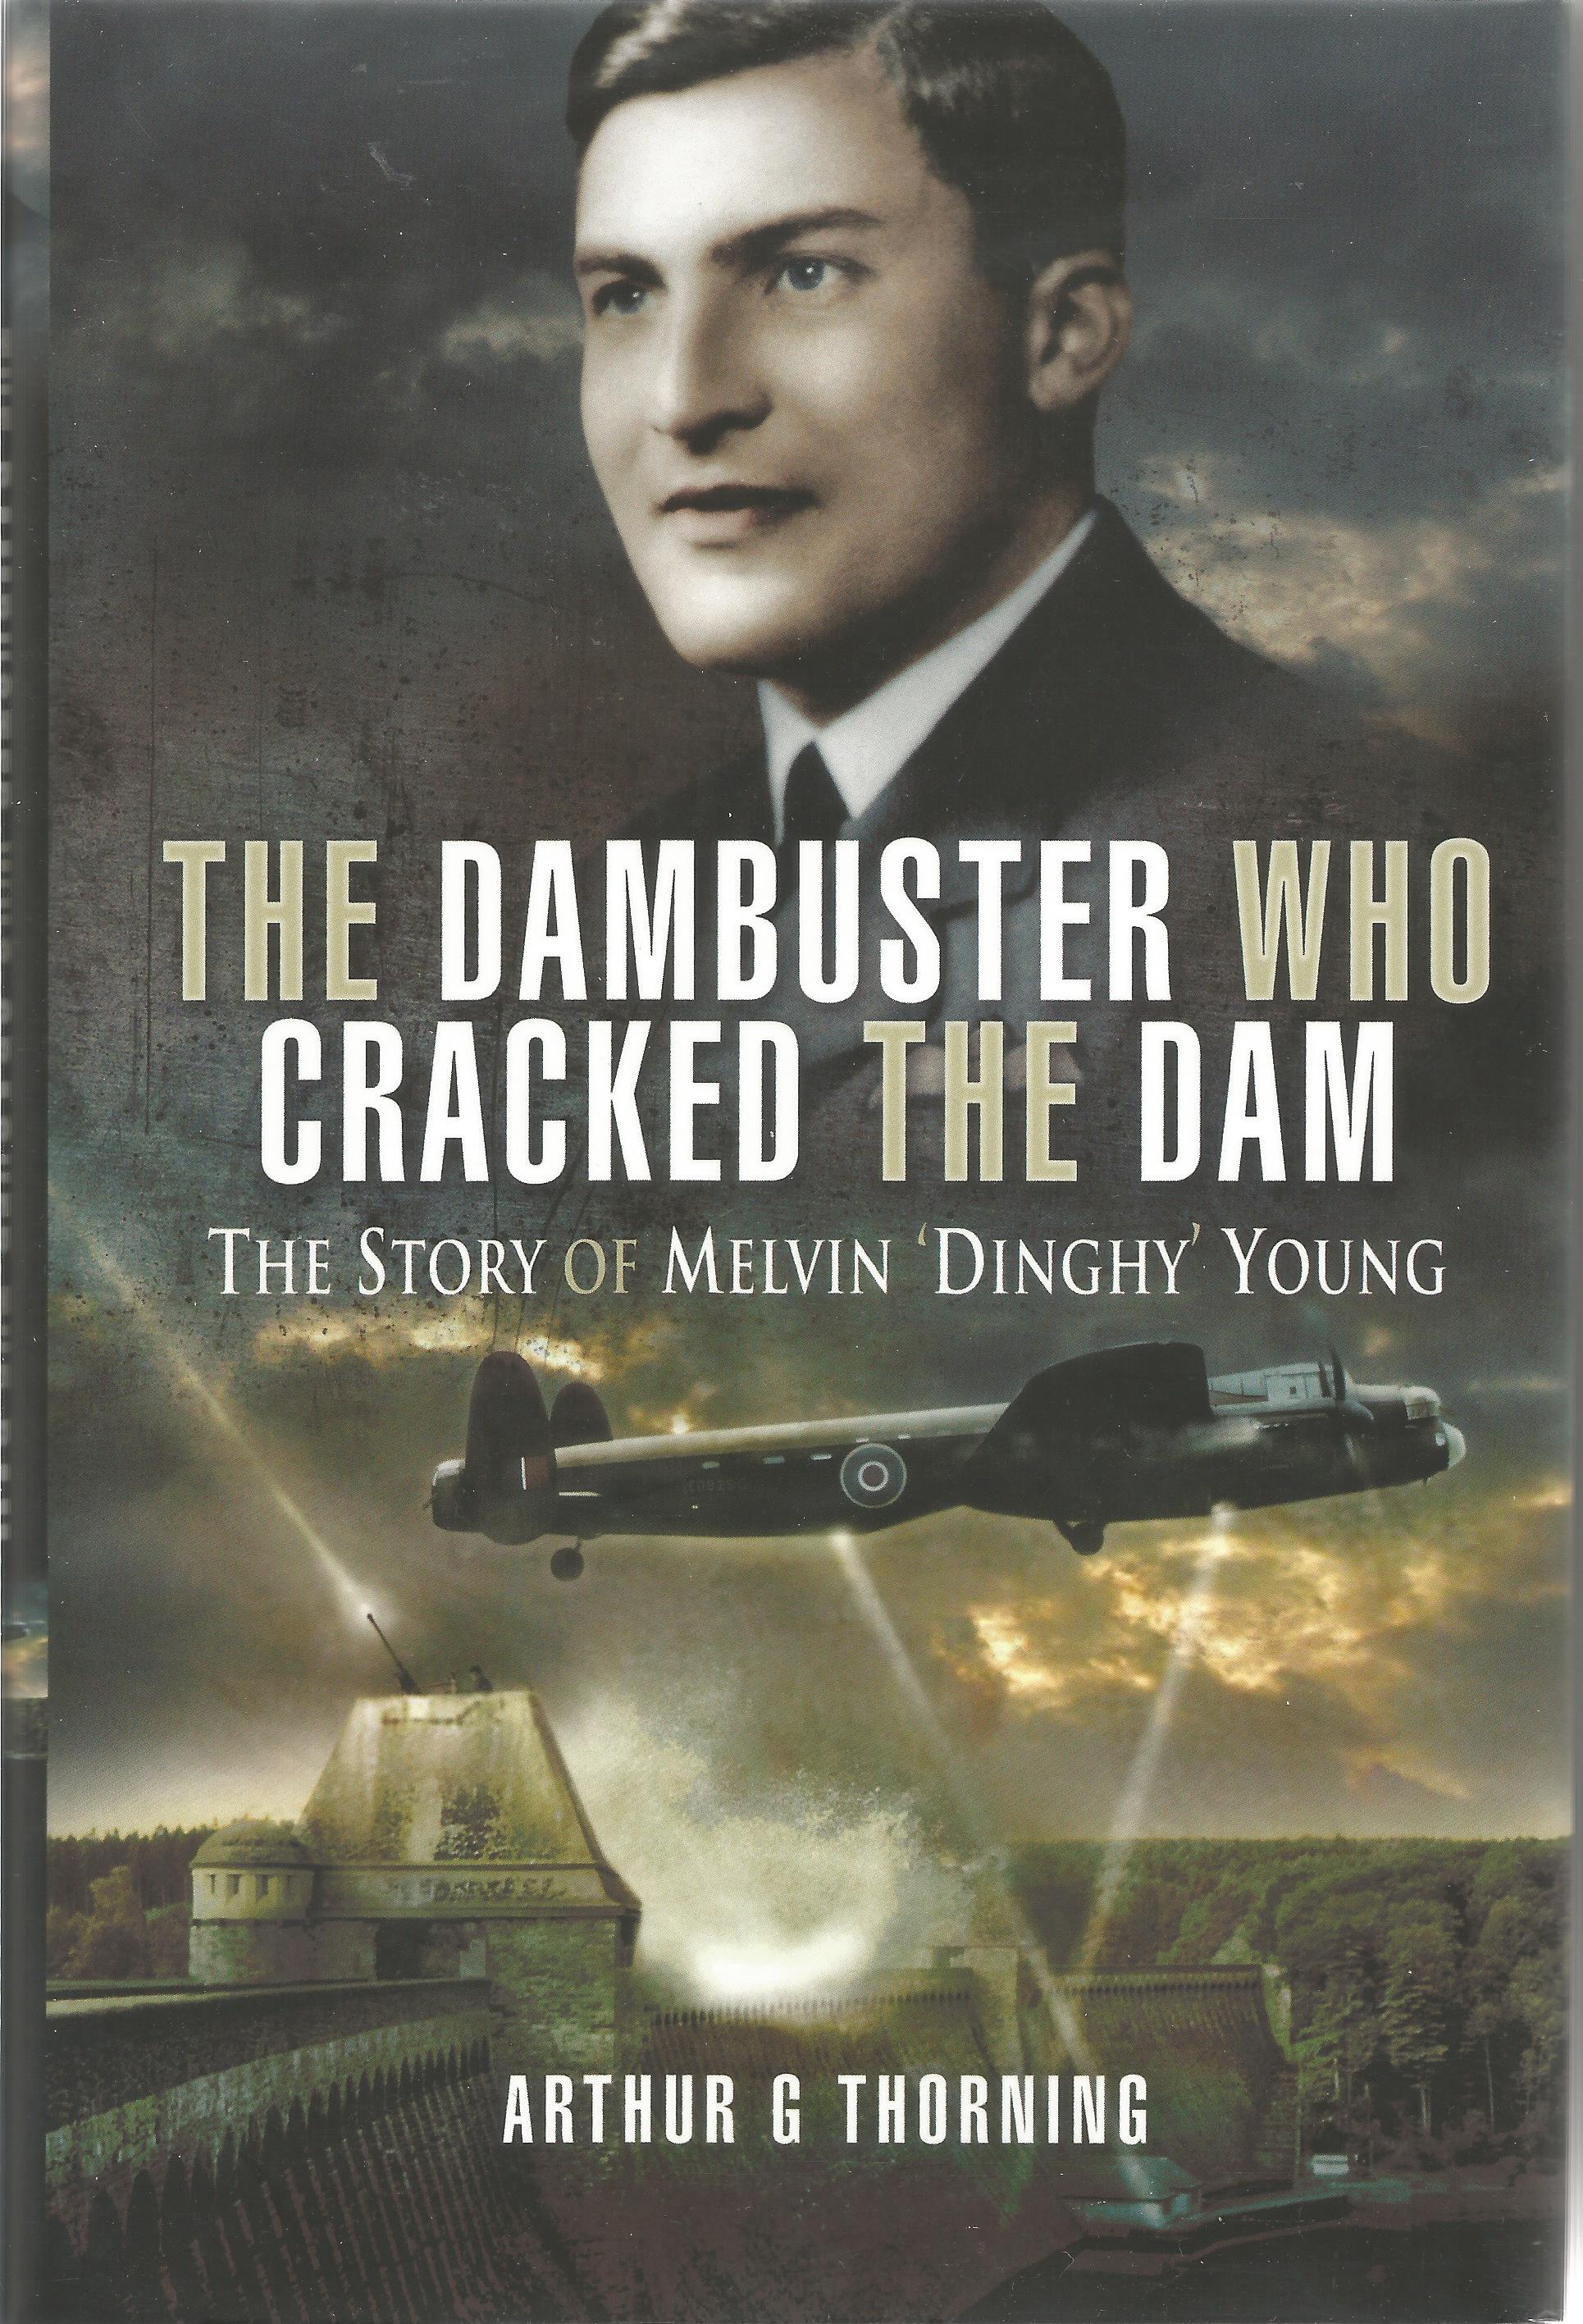 Arthur G Thorning. The Dambuster Who Cracked The Dam- the story of Melvin 'Dinghy' Young. A WW2